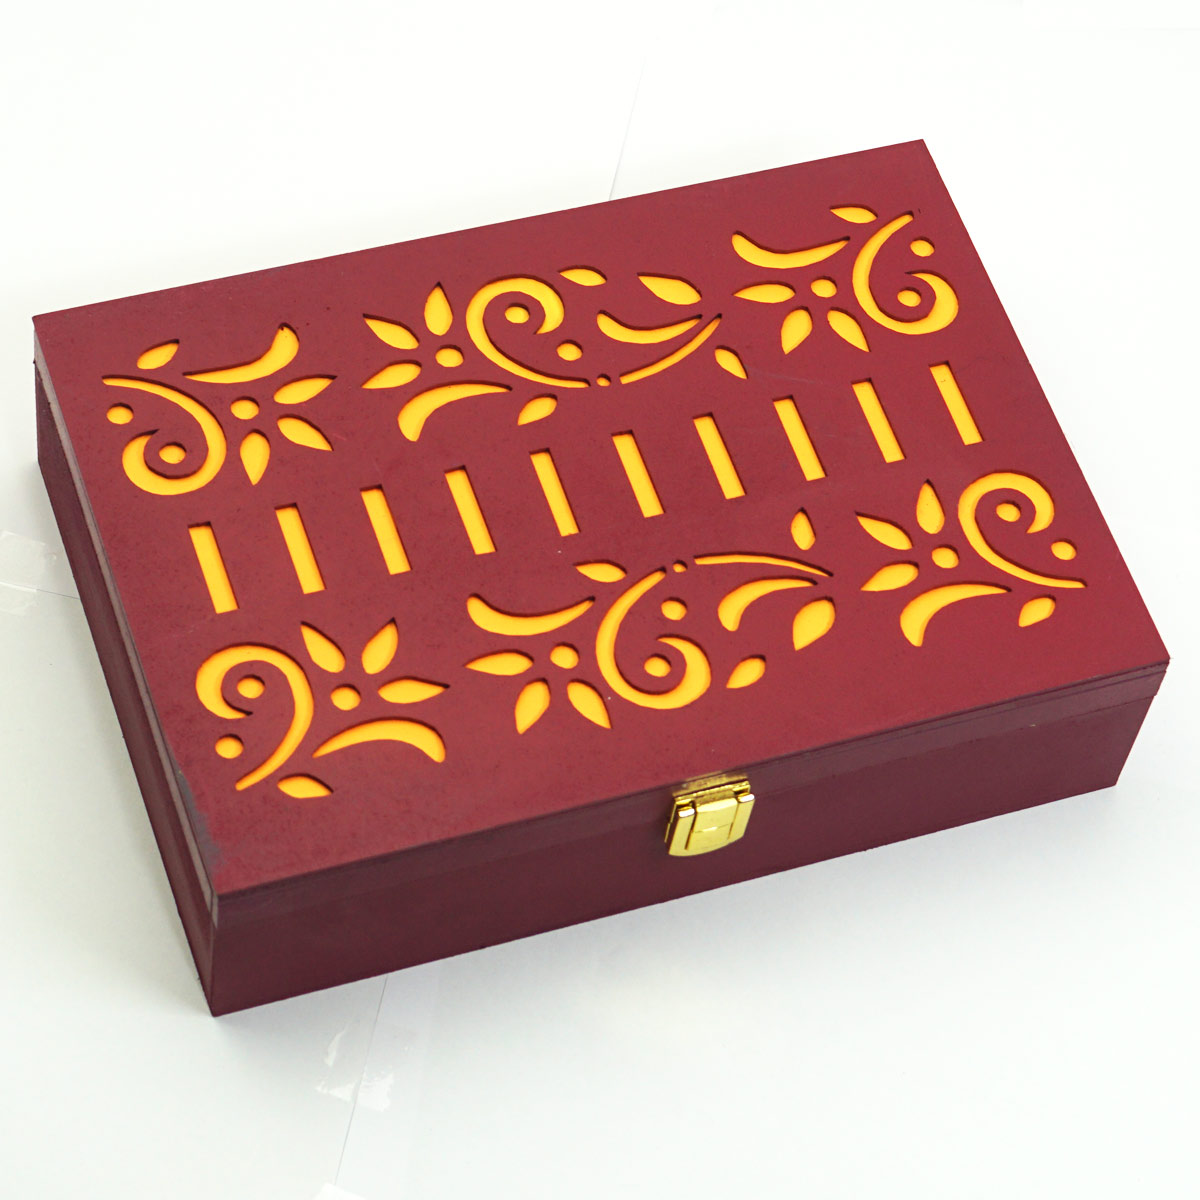 penhouse.in Customisable MDF Multi Purpose Maroon Color With Orange Design 250mm X 175mm Wooden Box 250mm X 175mm MDF SKU MDP057